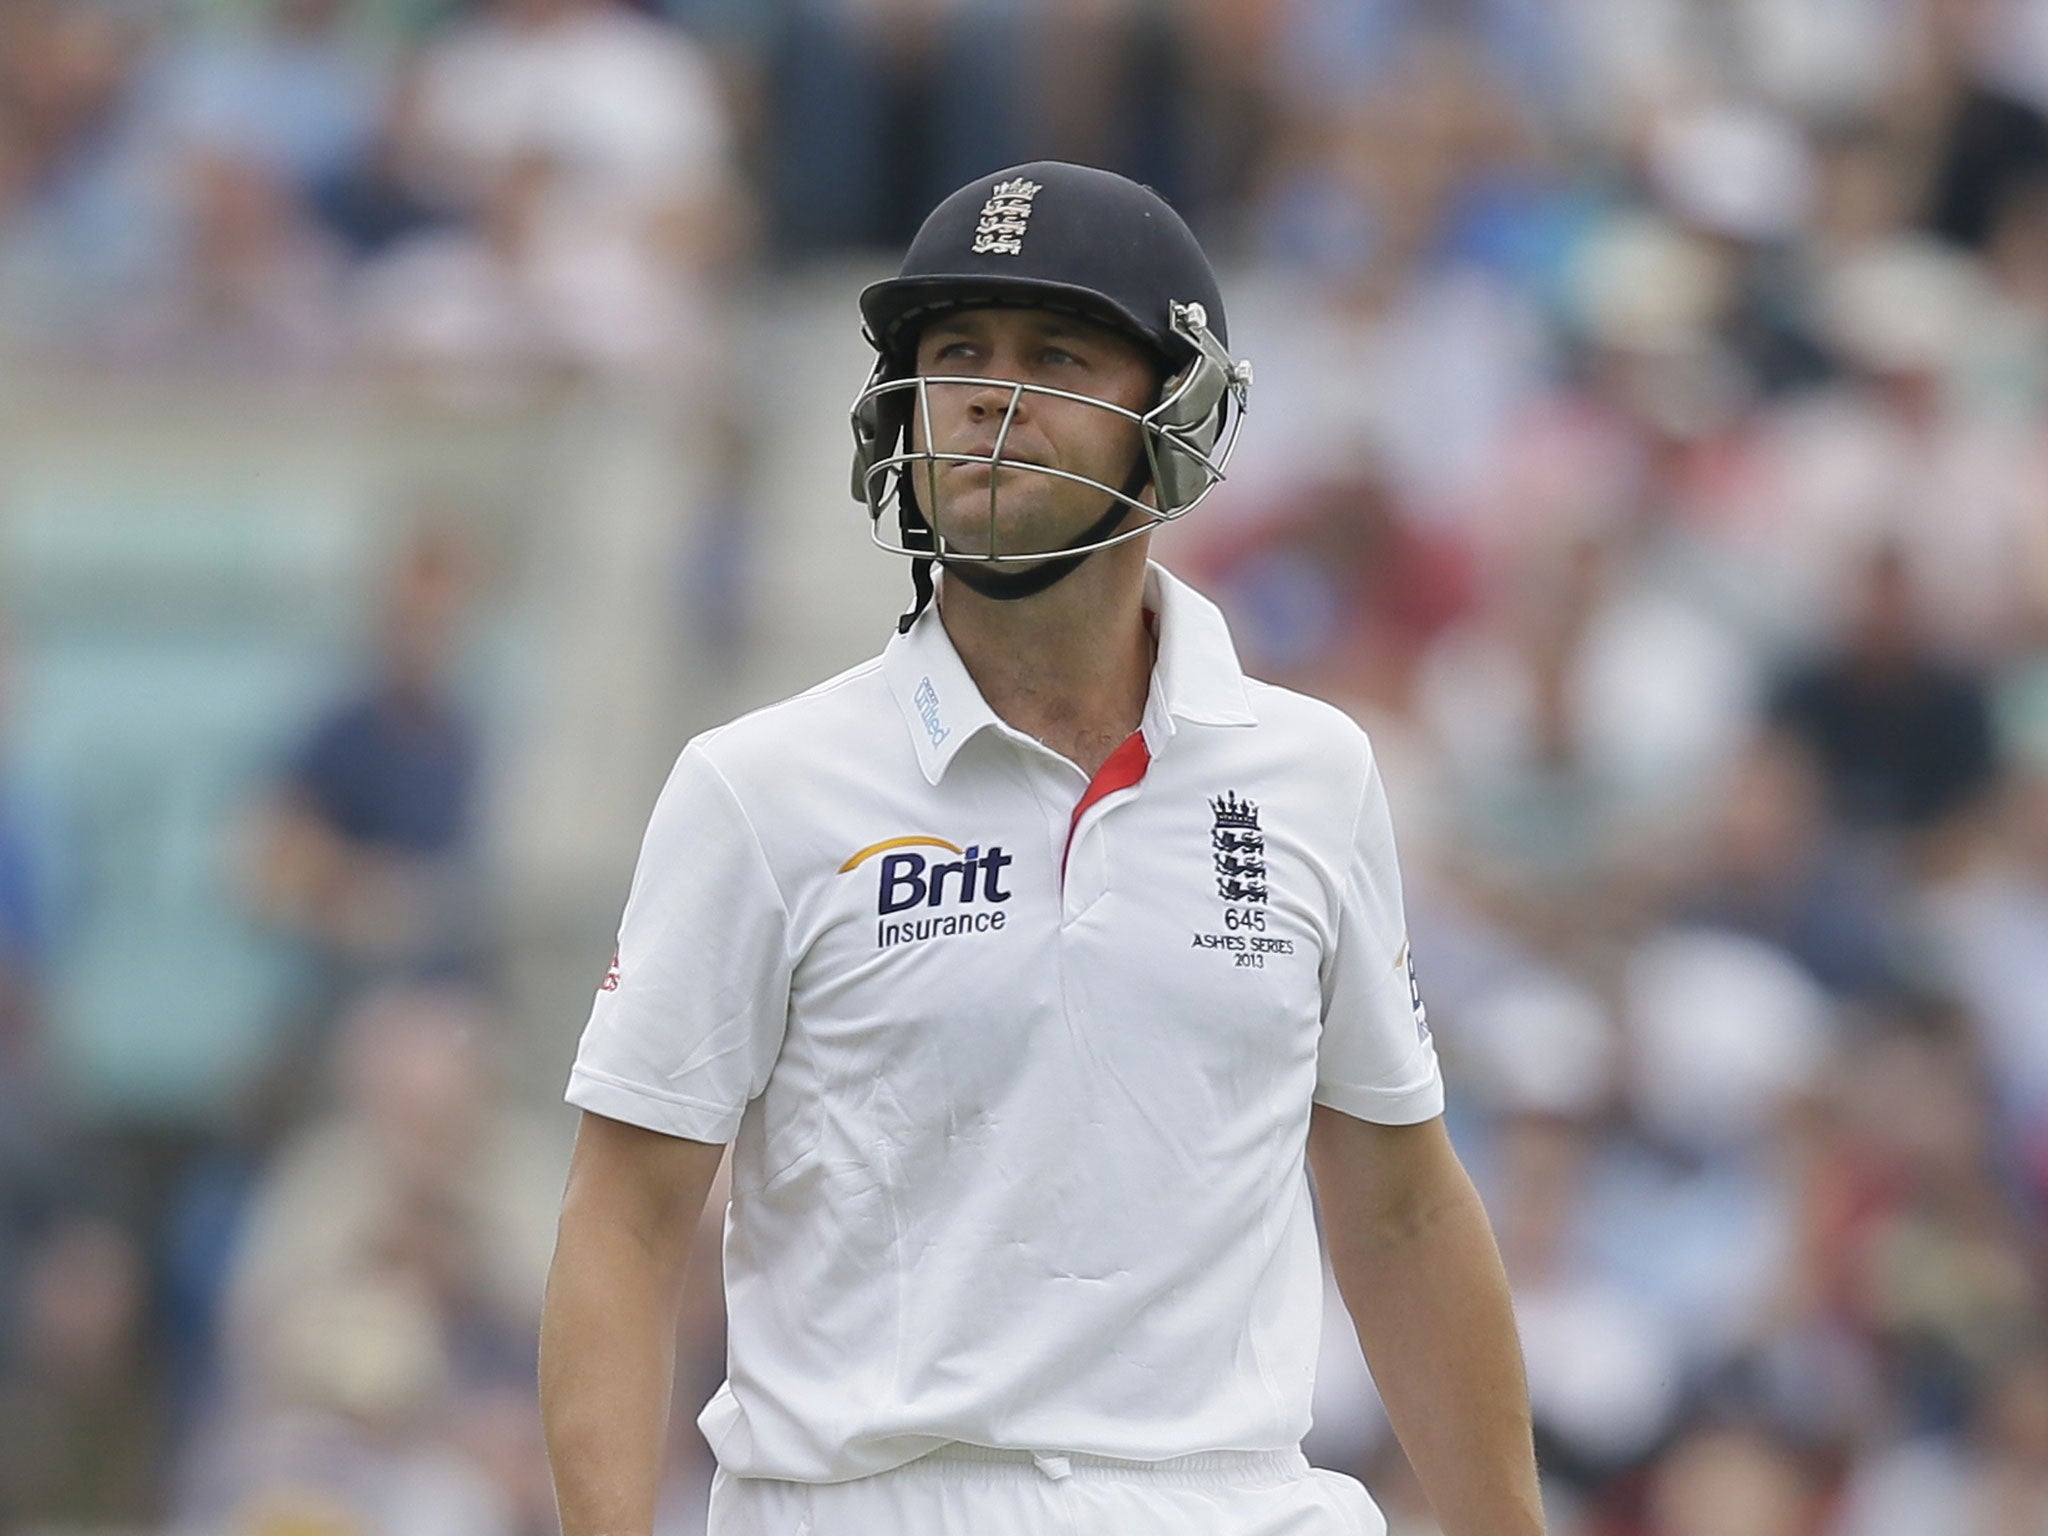 Jonathan Trott walks off after being given out lbw having scored 40 from 143 balls